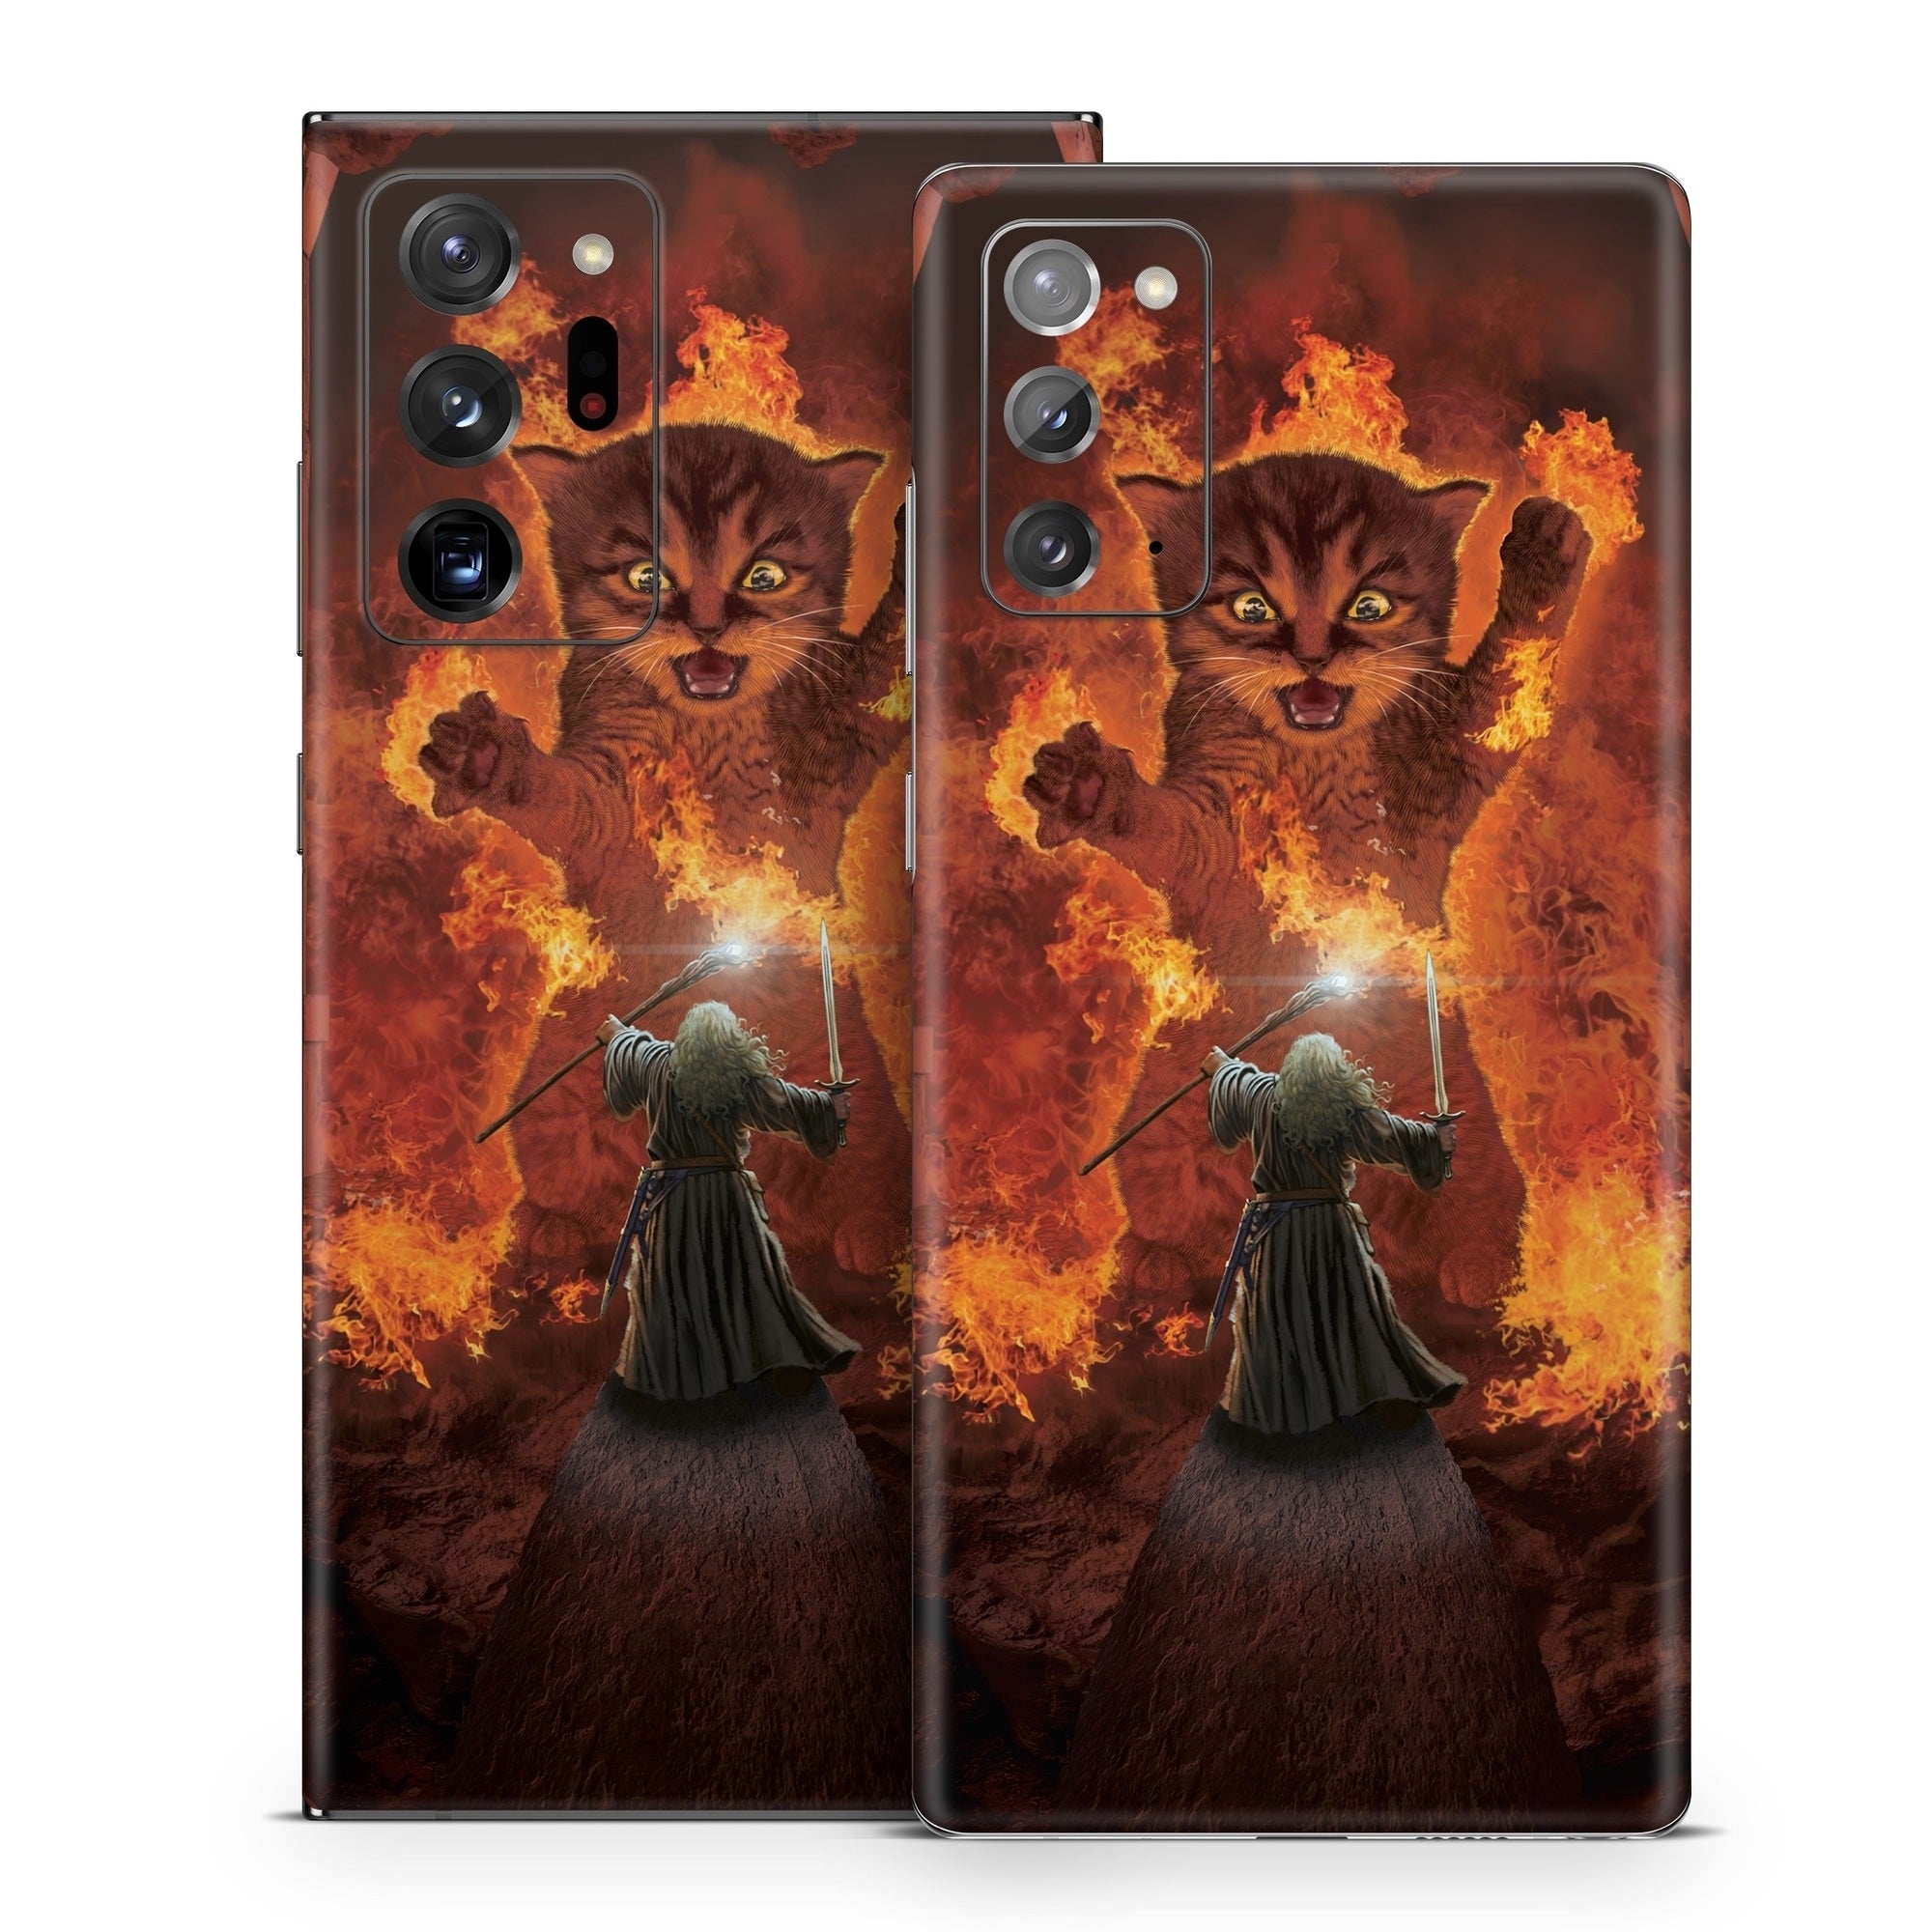 You Shall Not Pass - Samsung Galaxy Note 20 Skin